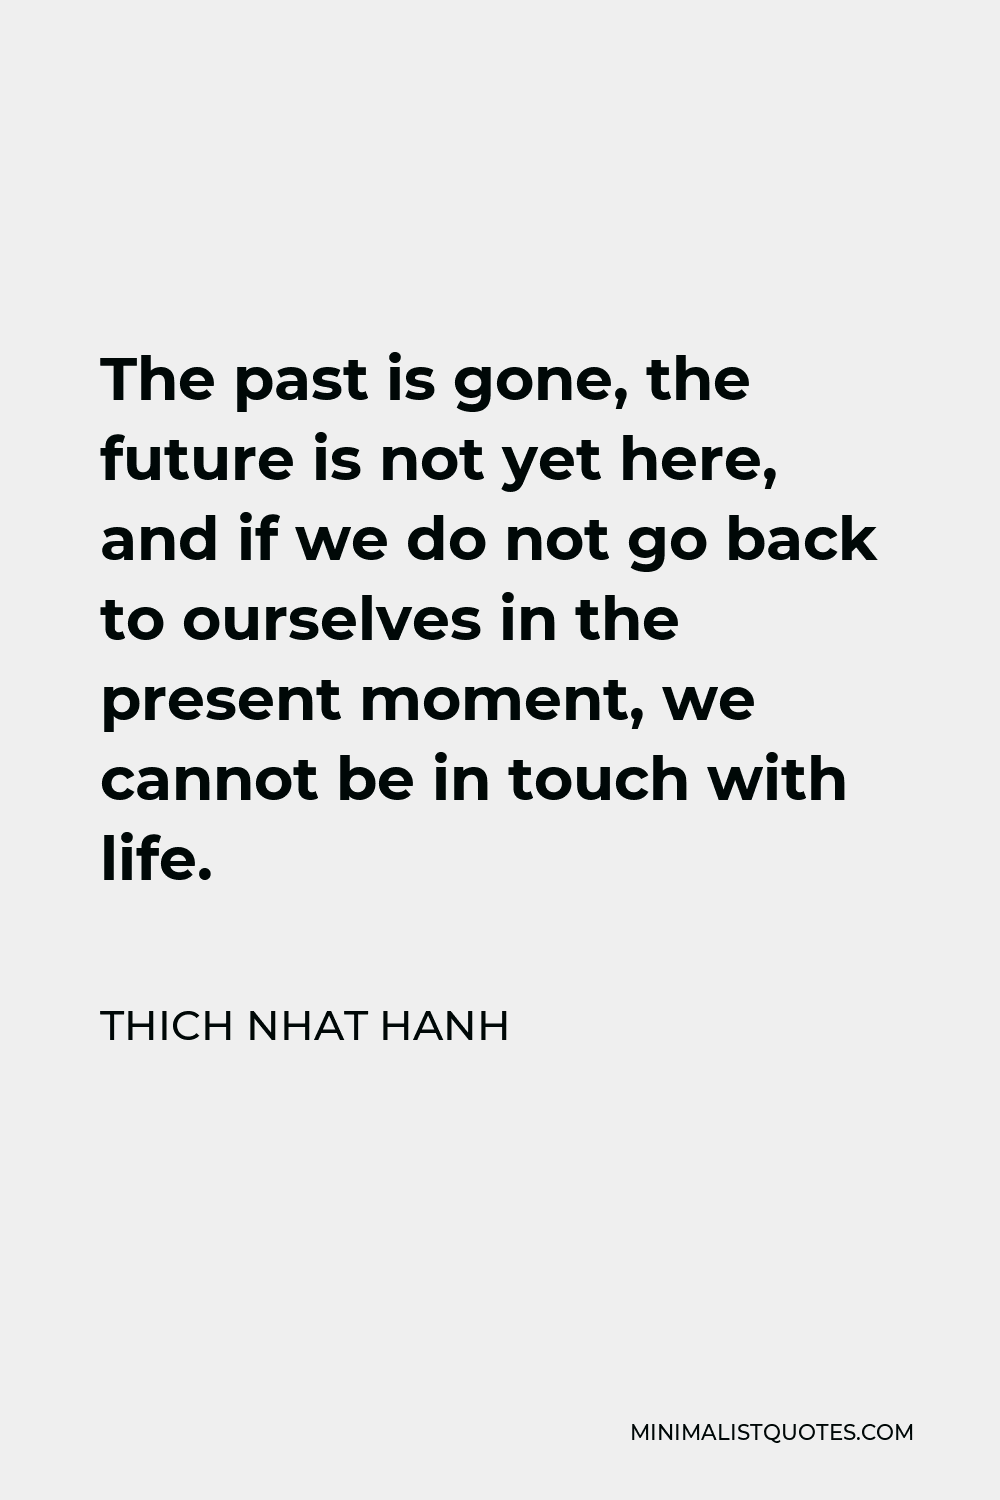 Thich Nhat Hanh Quote - The past is gone, the future is not yet here, and if we do not go back to ourselves in the present moment, we cannot be in touch with life.